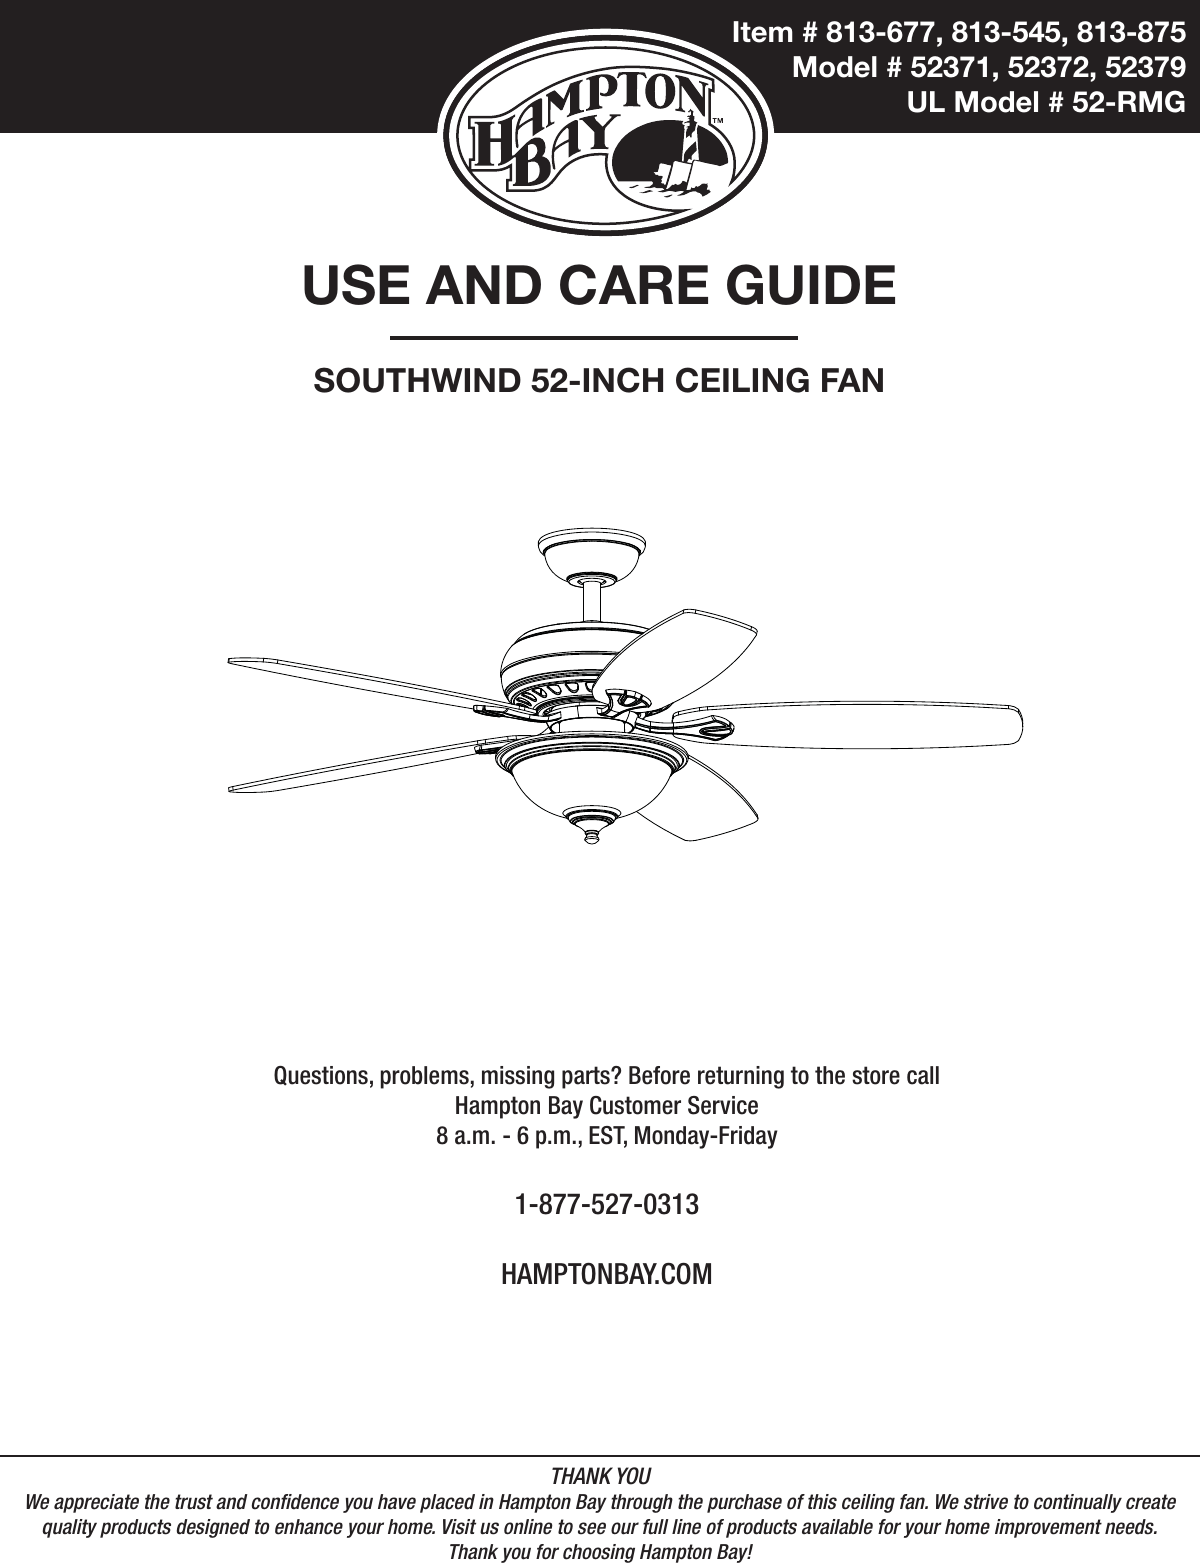 Item # 813-677, 813-545, 813-875  Model # 52371, 52372, 52379UL Model # 52-RMGUSE AND CARE GUIDESOUTHWIND 52-INCH CEILING FANQuestions, problems, missing parts? Before returning to the store call Hampton Bay Customer Service8 a.m. - 6 p.m., EST, Monday-Friday1-877-527-0313HAMPTONBAY.COMTHANK YOUWe appreciate the trust and condence you have placed in Hampton Bay through the purchase of this ceiling fan. We strive to continually createquality products designed to enhance your home. Visit us online to see our full line of products available for your home improvement needs. Thank you for choosing Hampton Bay!